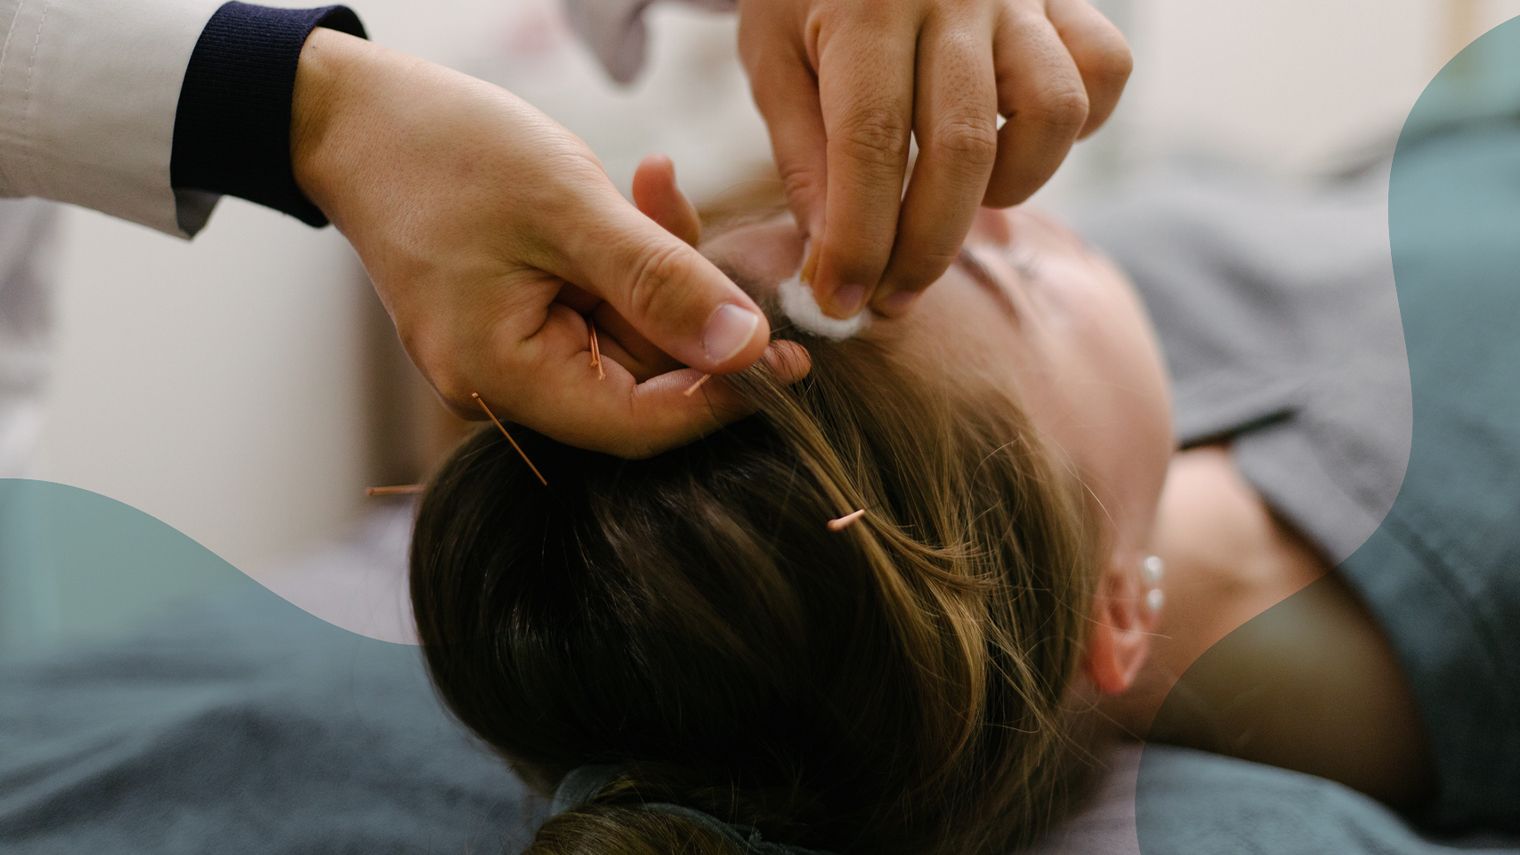 I Tried Acupuncture for Migraine: Here’s What Happened